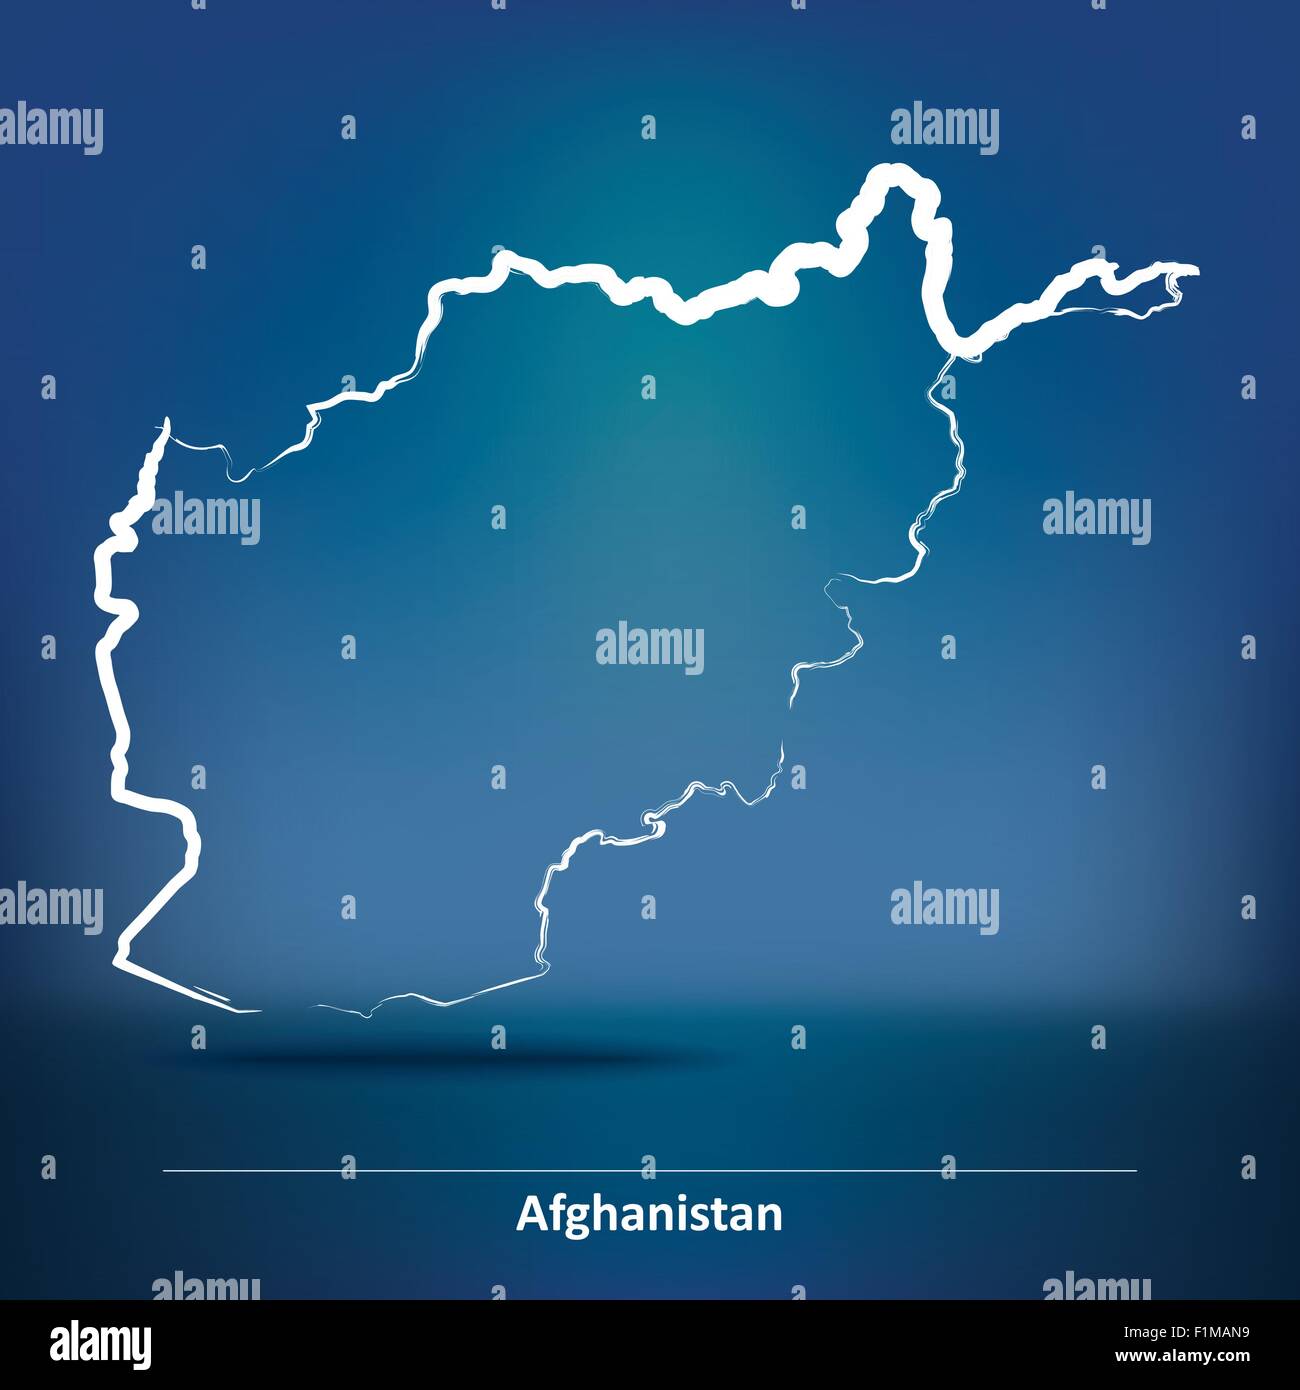 Afghanistan Road Stock Illustrations, Cliparts and Royalty Free Afghanistan  Road Vectors